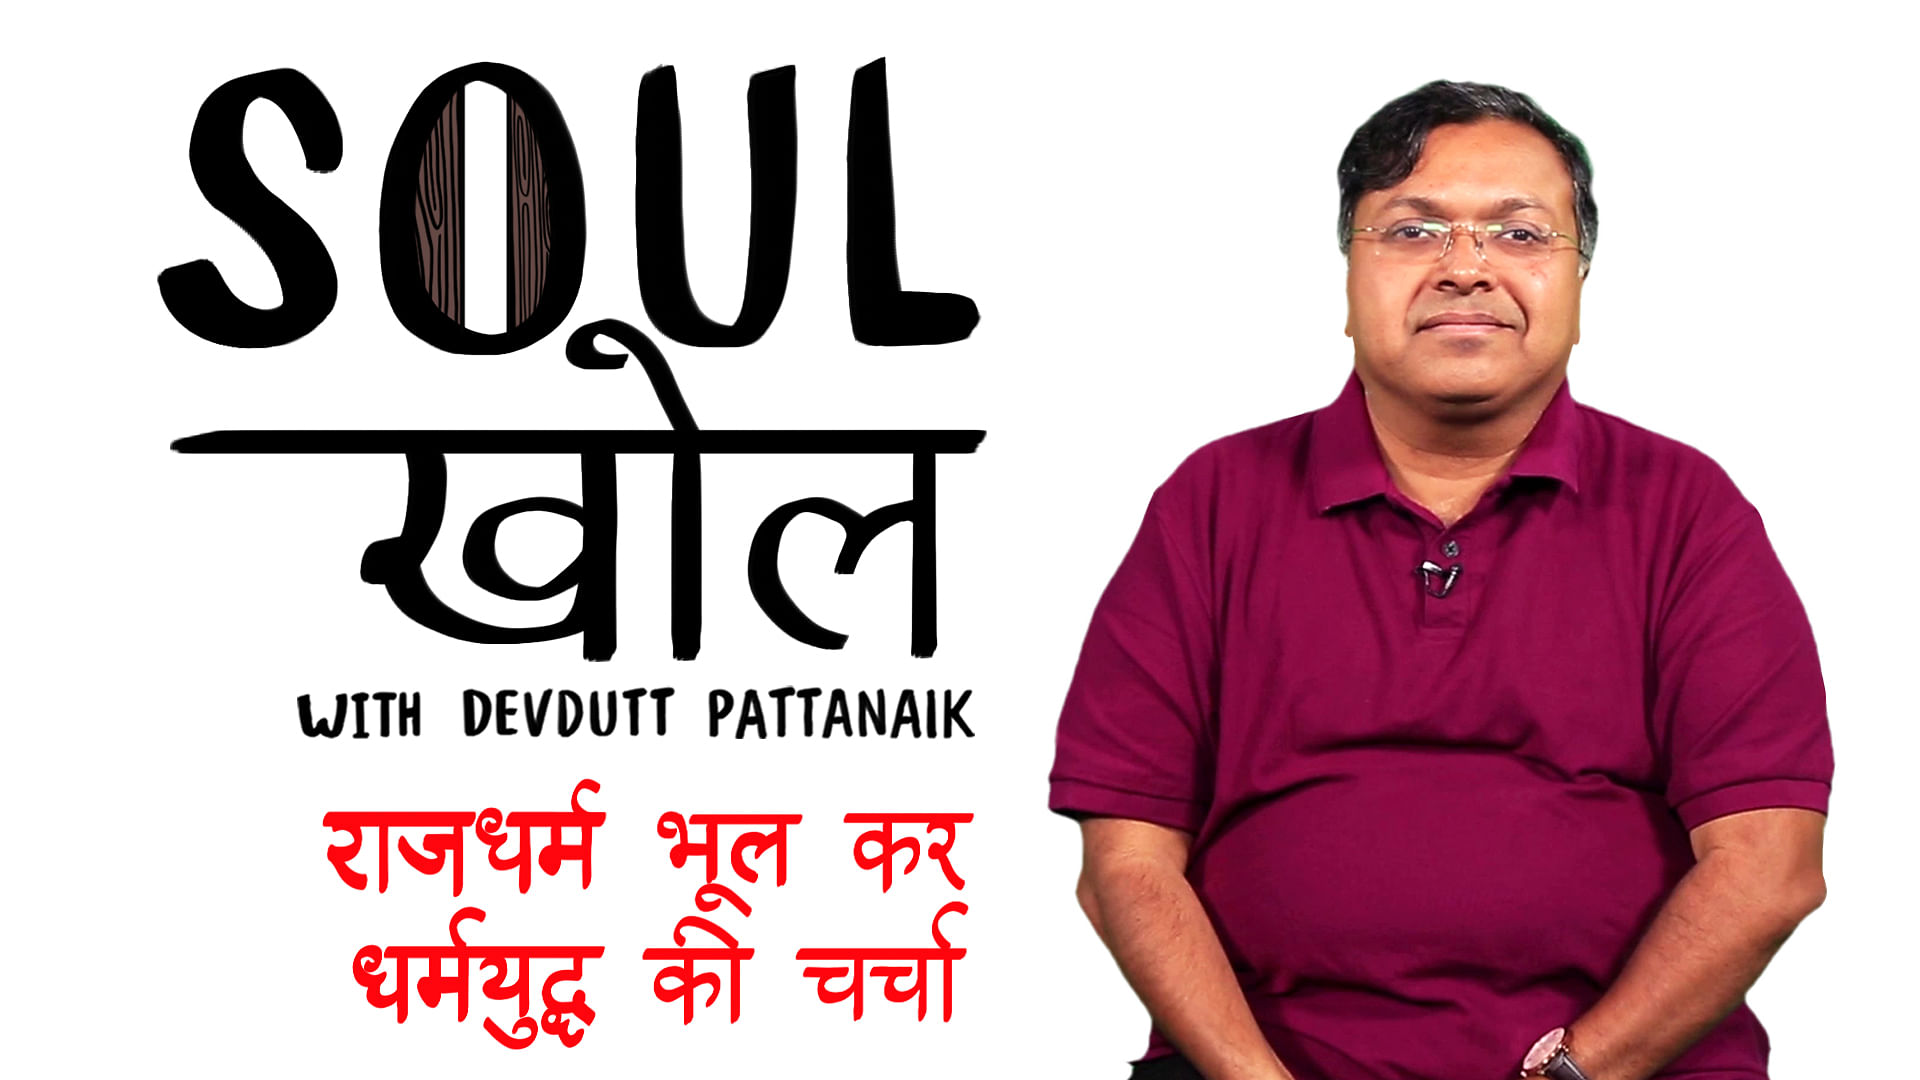 Devdutt Pattanaik decodes that politicians only focus on the ‘seat’ and not on its people.